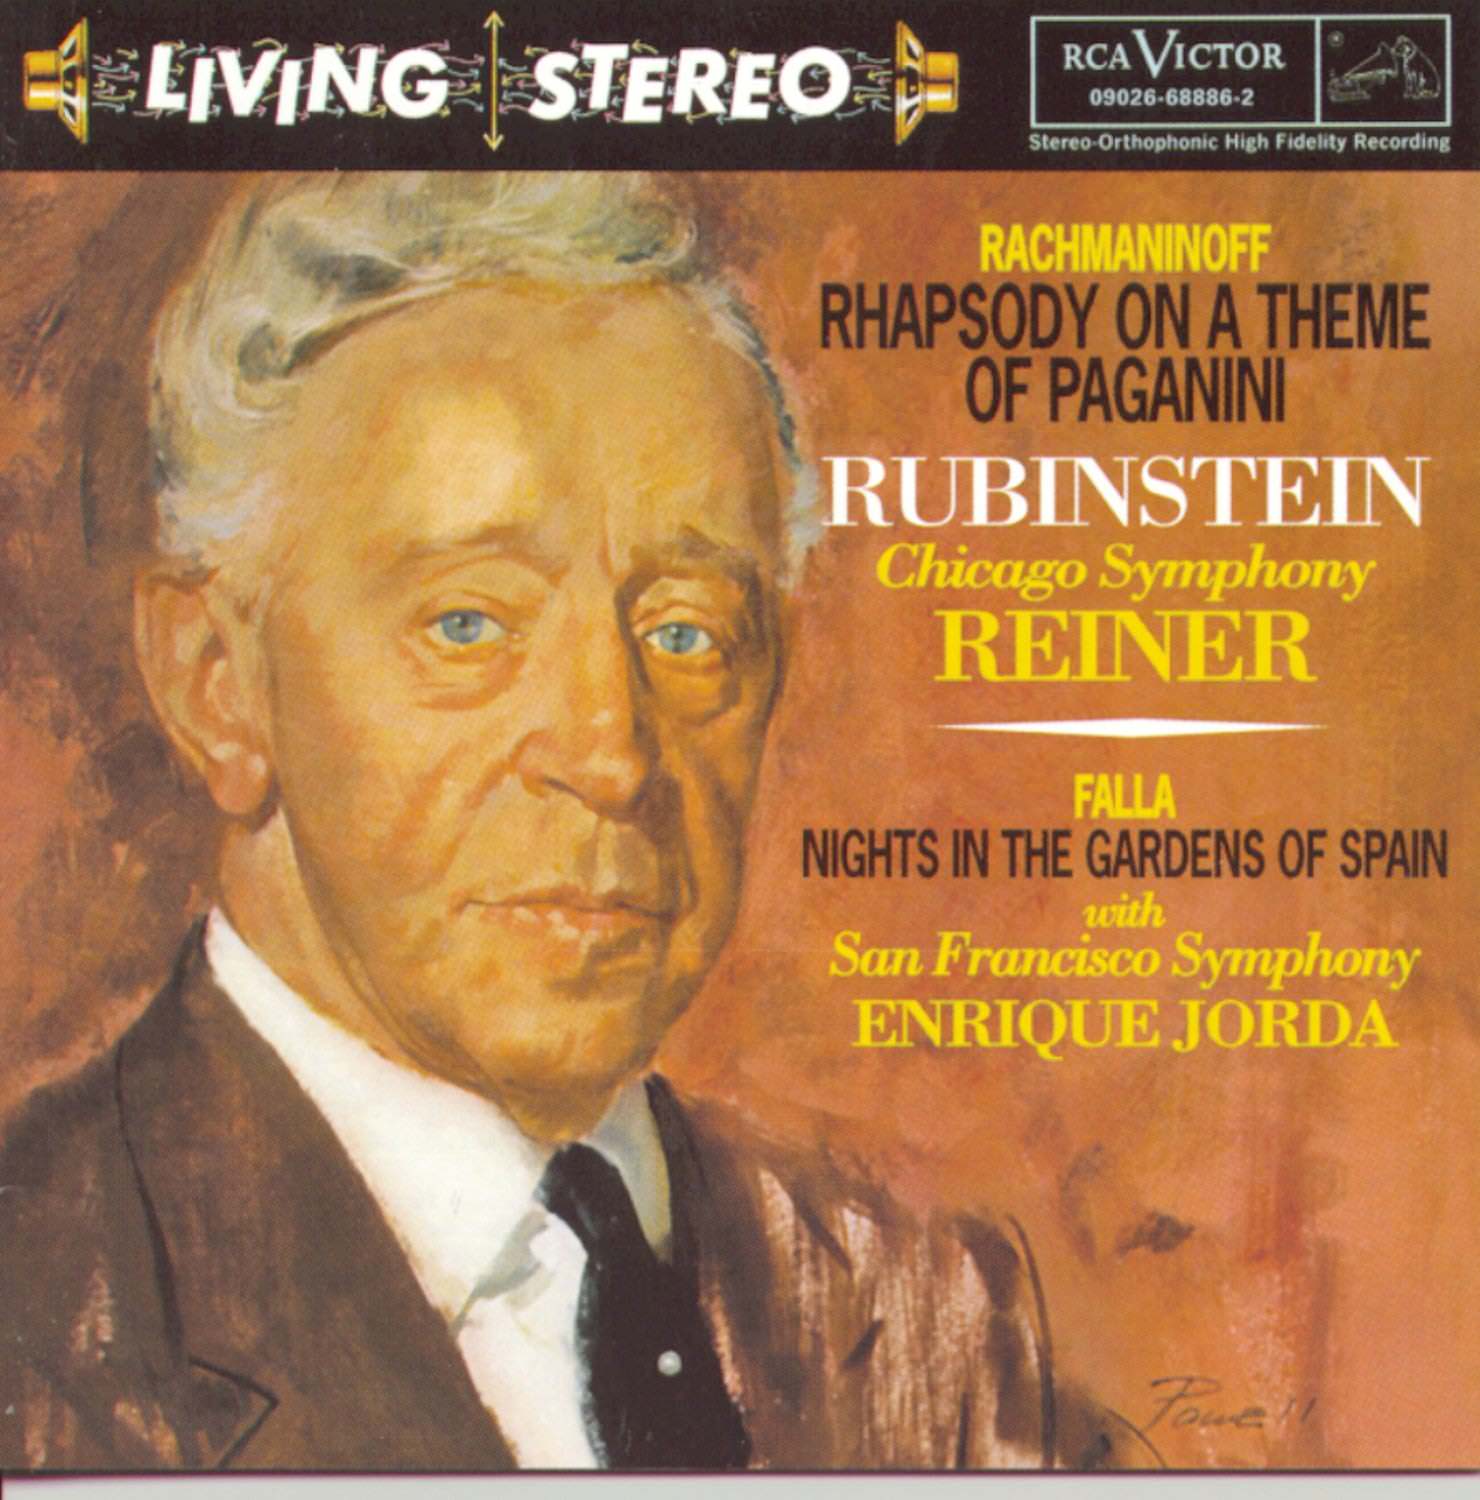 Arthur Rubinstein - Rachmaninoff: Rhapsody On A Theme Of Paganini - Falla: Nights In The Gardens Of Spain (1978/2016) [AcousticSounds DSF DSD64/2.82MHz]